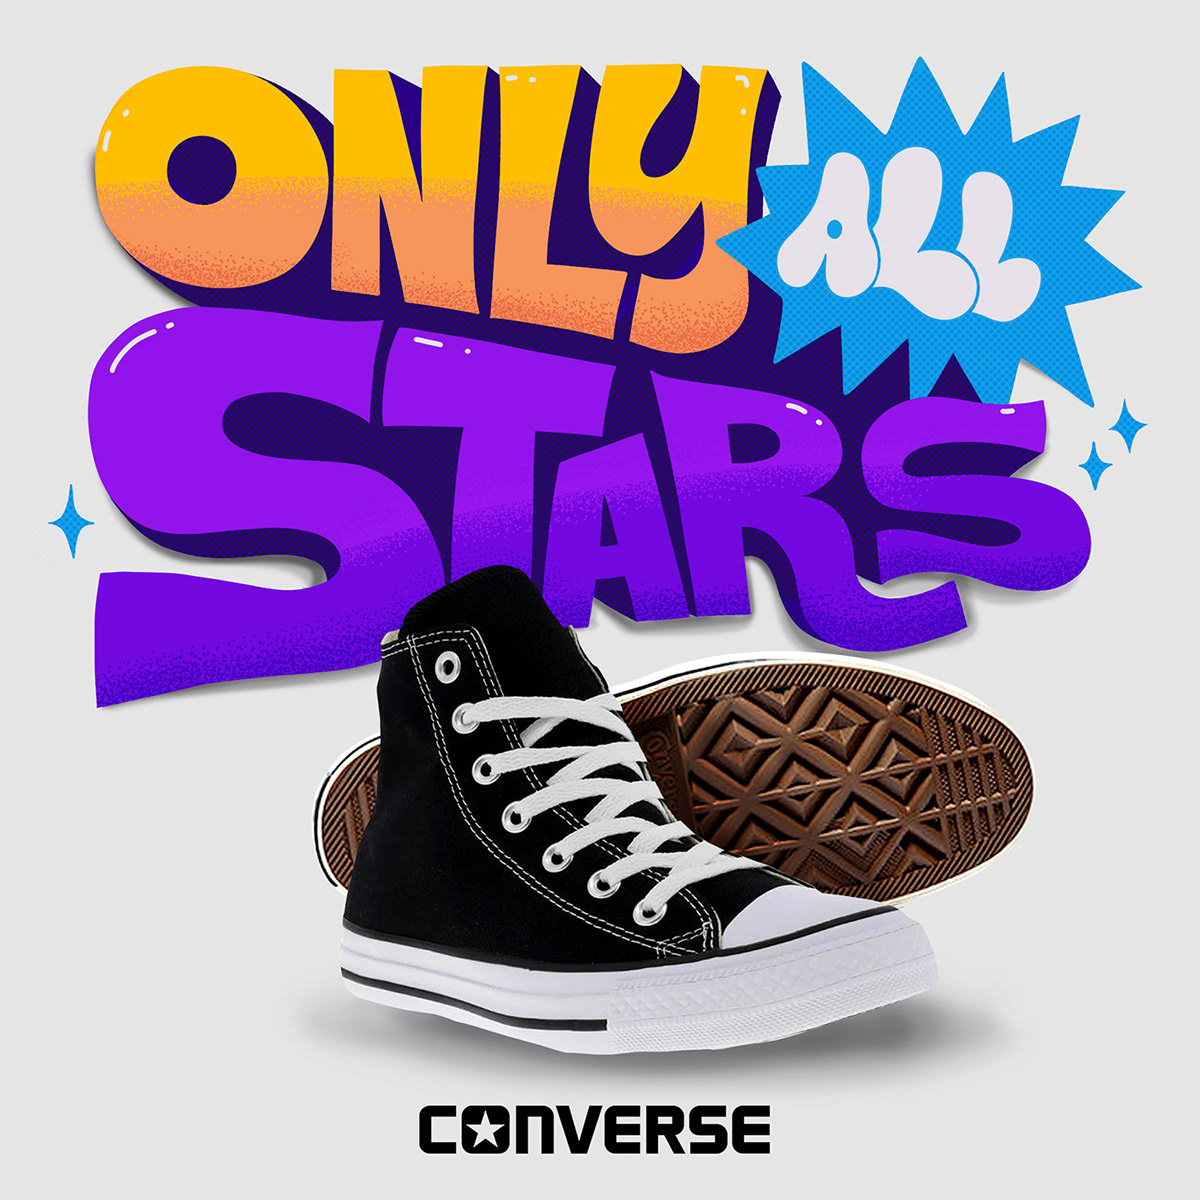 advertisement Advertising  Brand Design Character design  shoes sneakers typography  